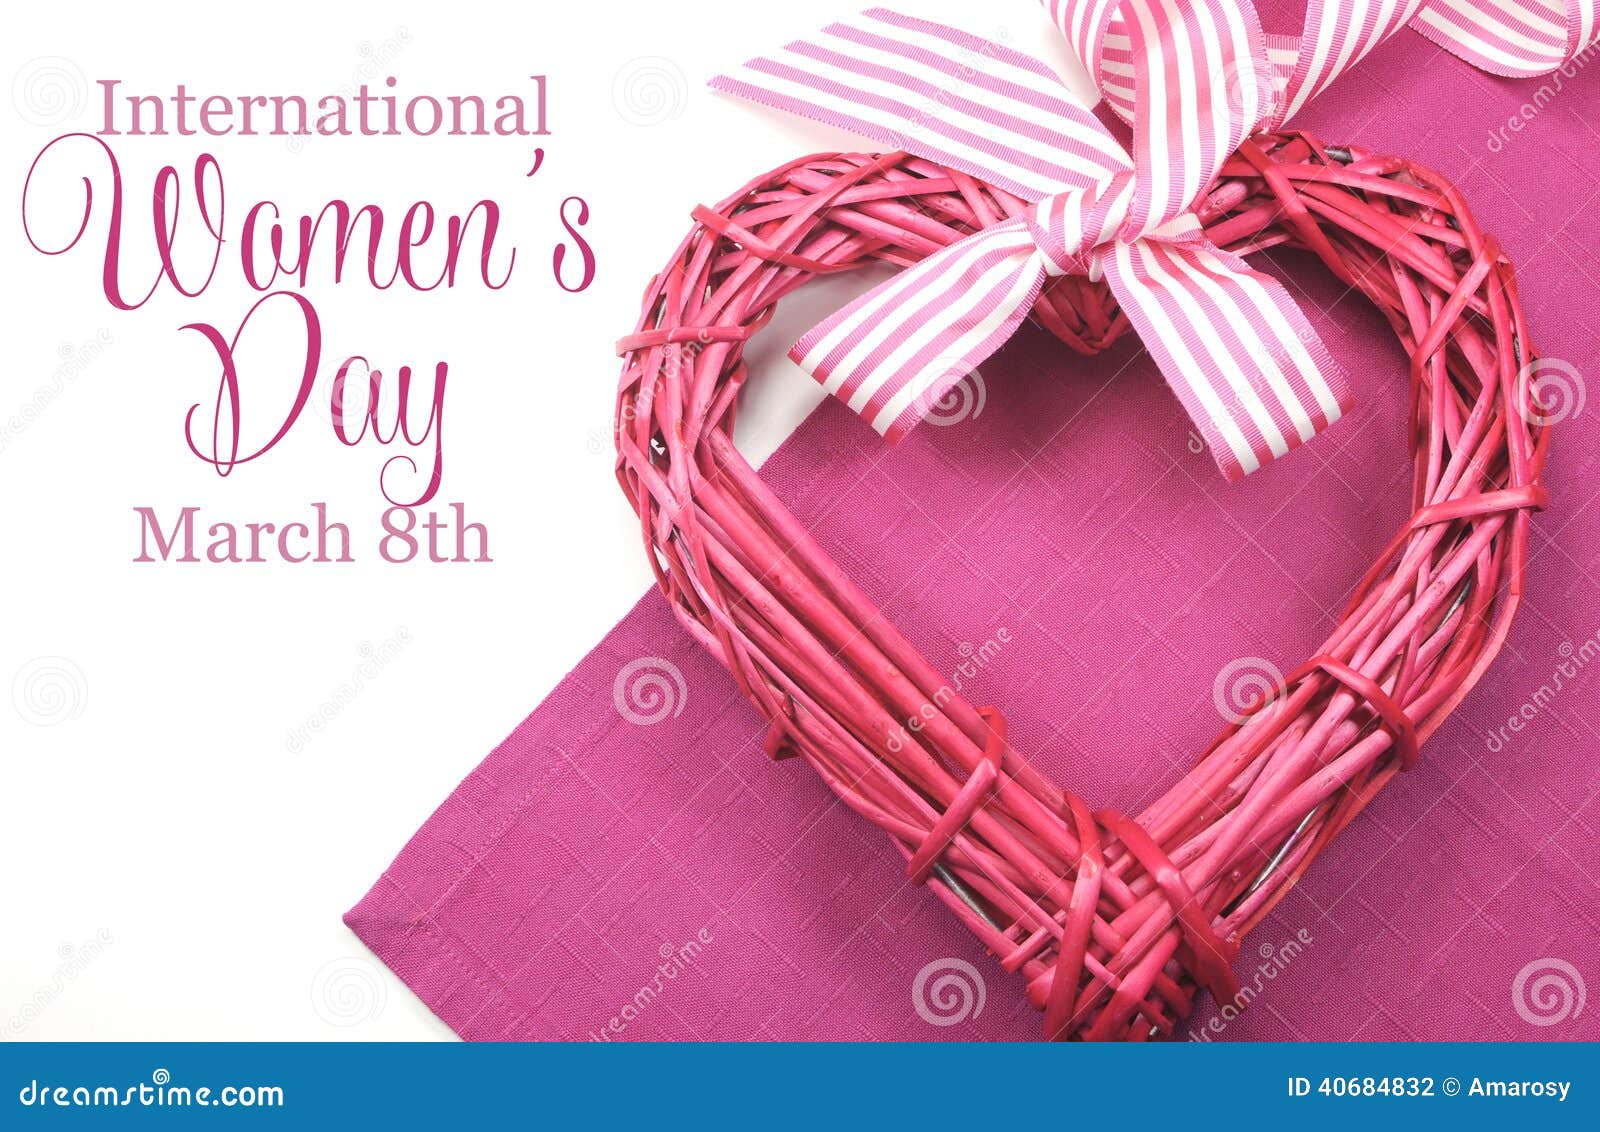 Happy International Womens Day, March 8, heart and text. Happy International Womens Day, March 8, celebration greeting message with pink rattan cane heart and stripe ribbon.